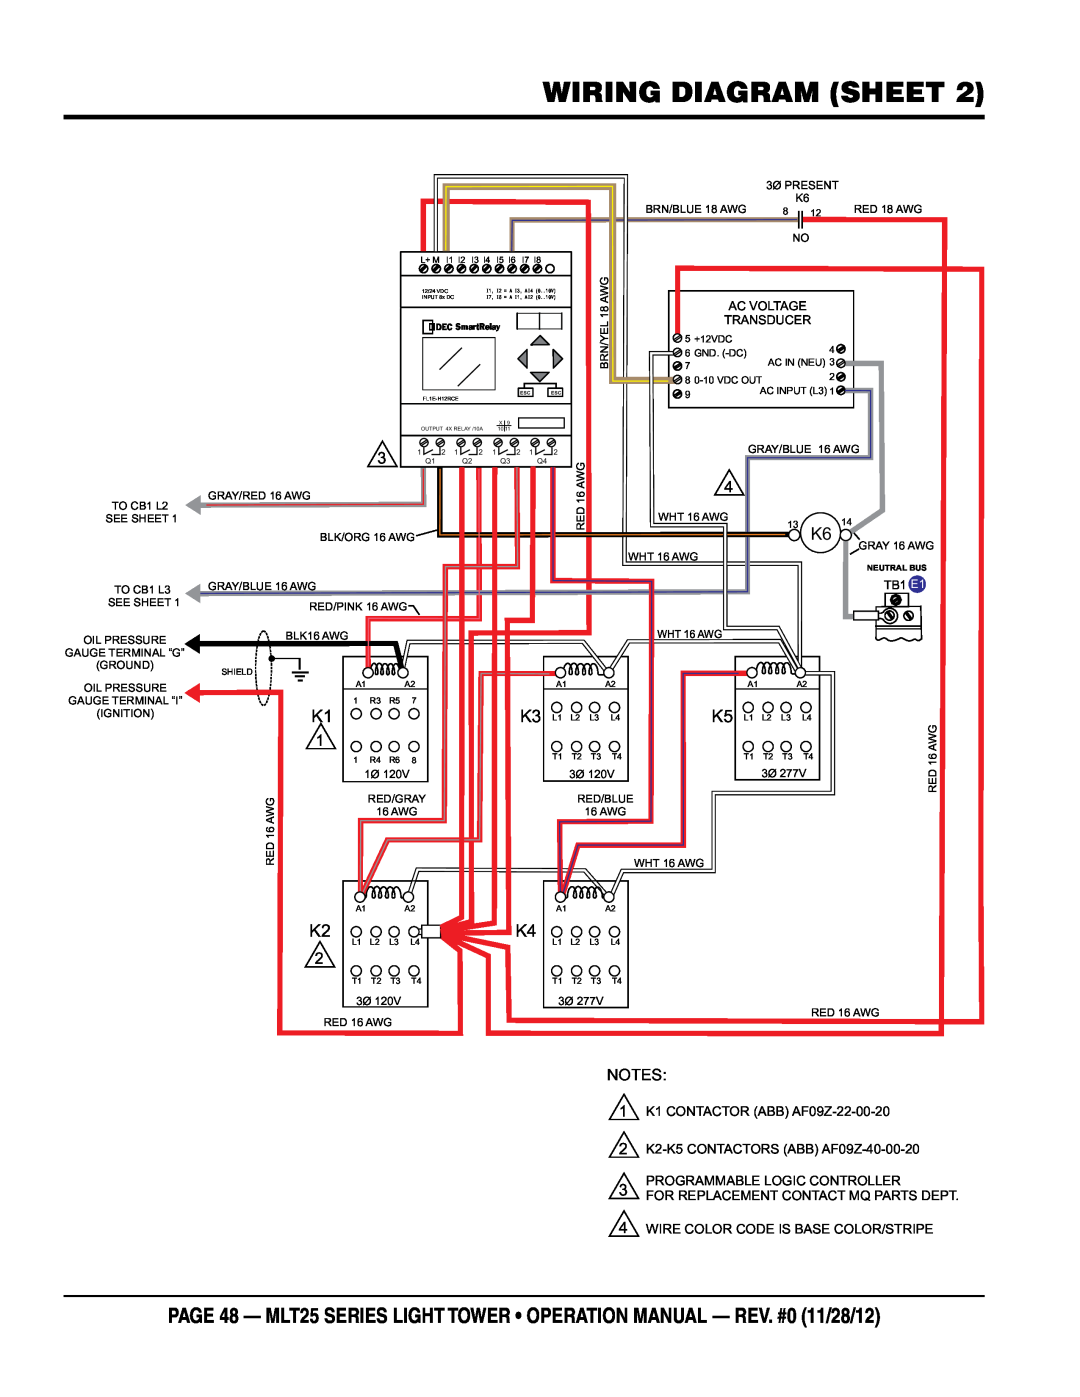 Multiquip MLT25 wiring diagram sheet, 1 K1 CONTACTOR ABB AF09Z-22-00-20, For Replacement Contact Mq Parts Dept 